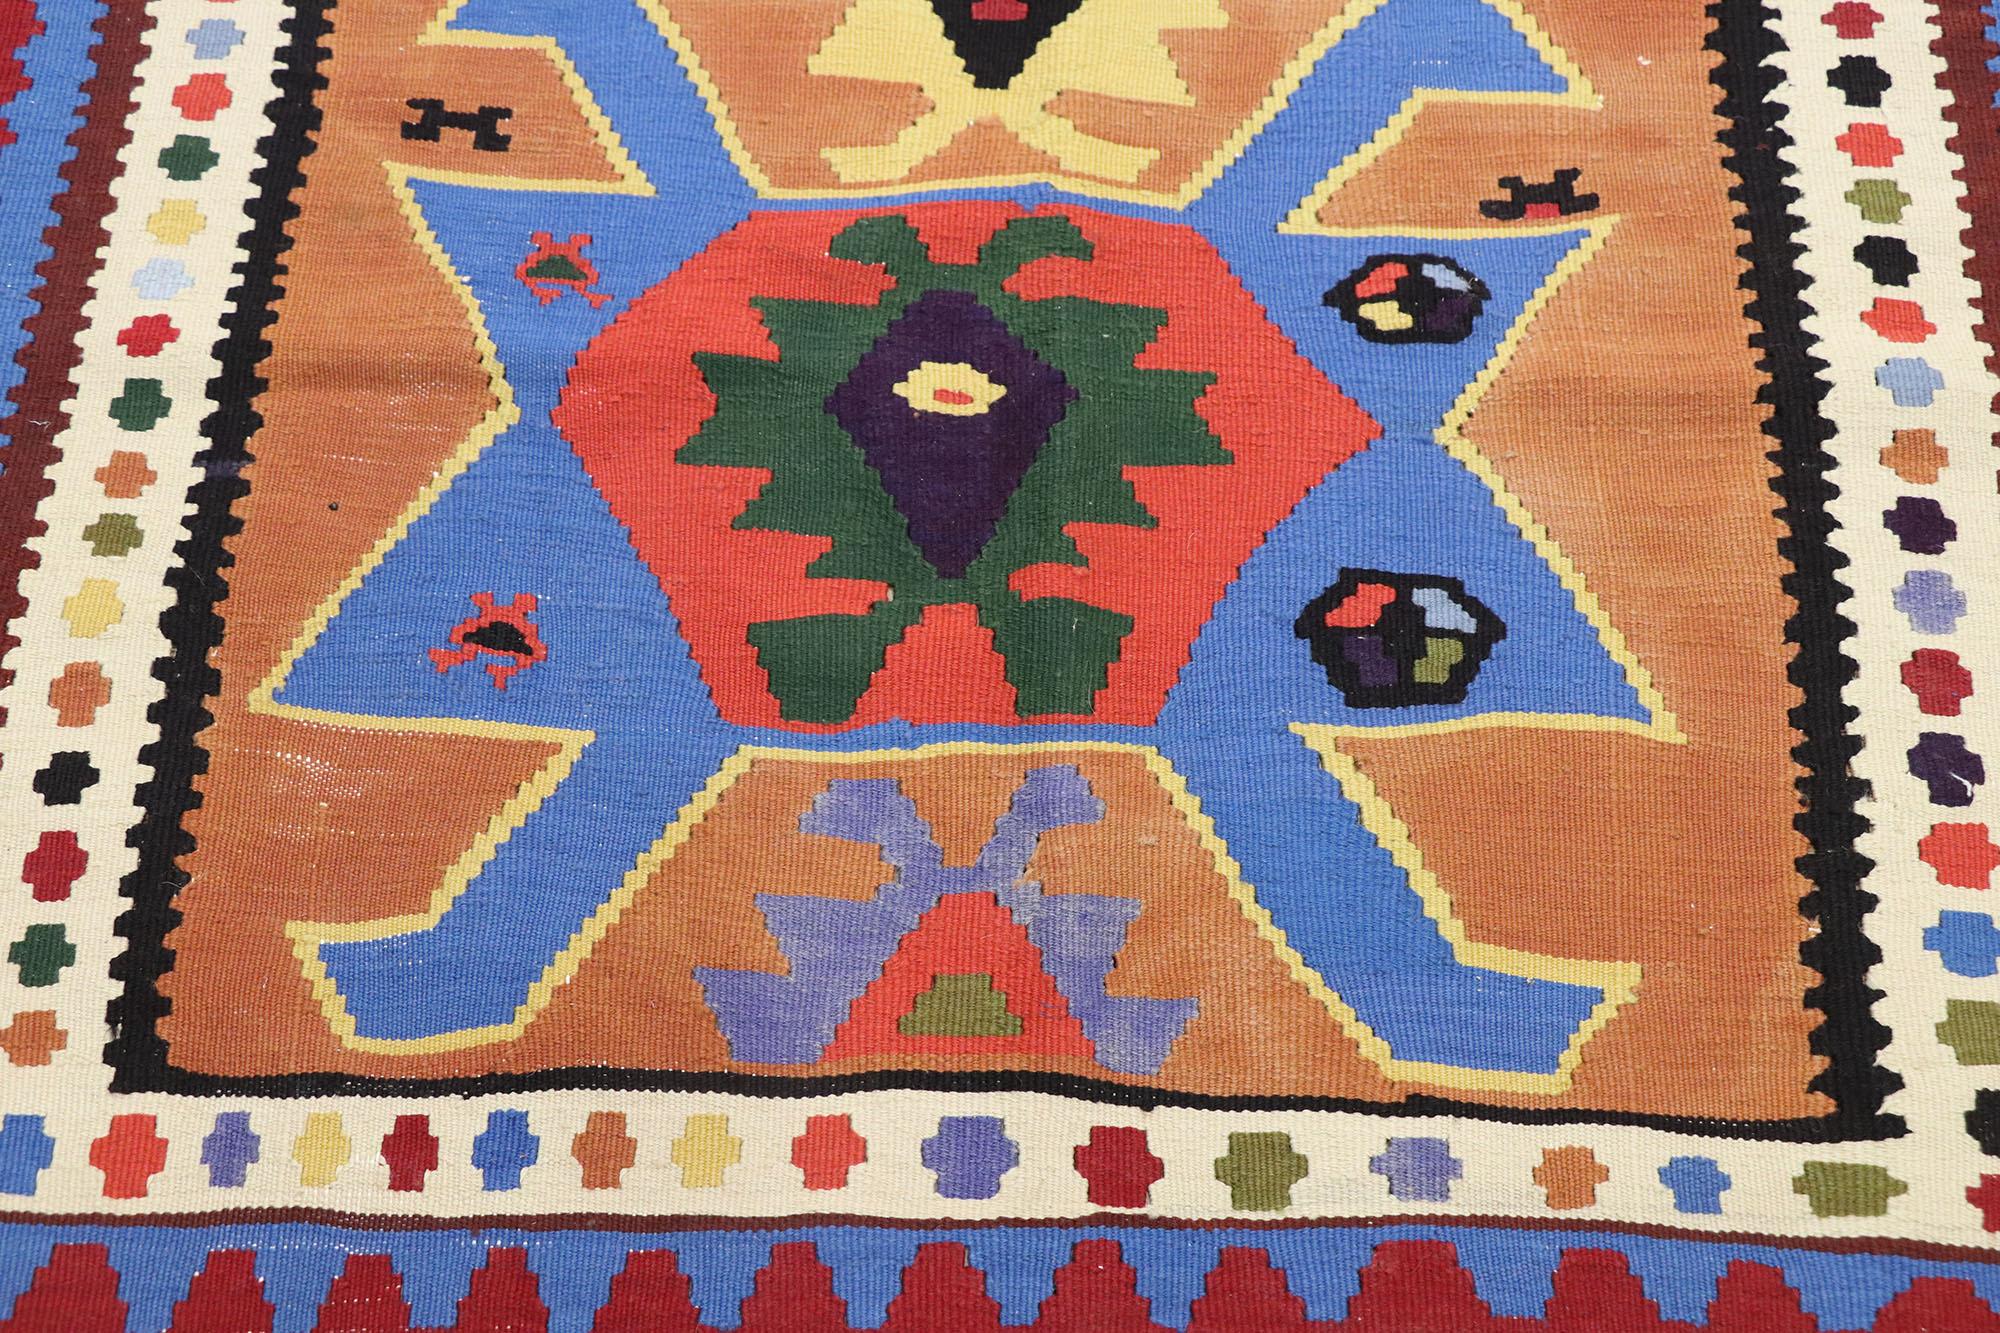 Vintage Persian Shiraz Kilim Rug with Tribal Style In Good Condition For Sale In Dallas, TX